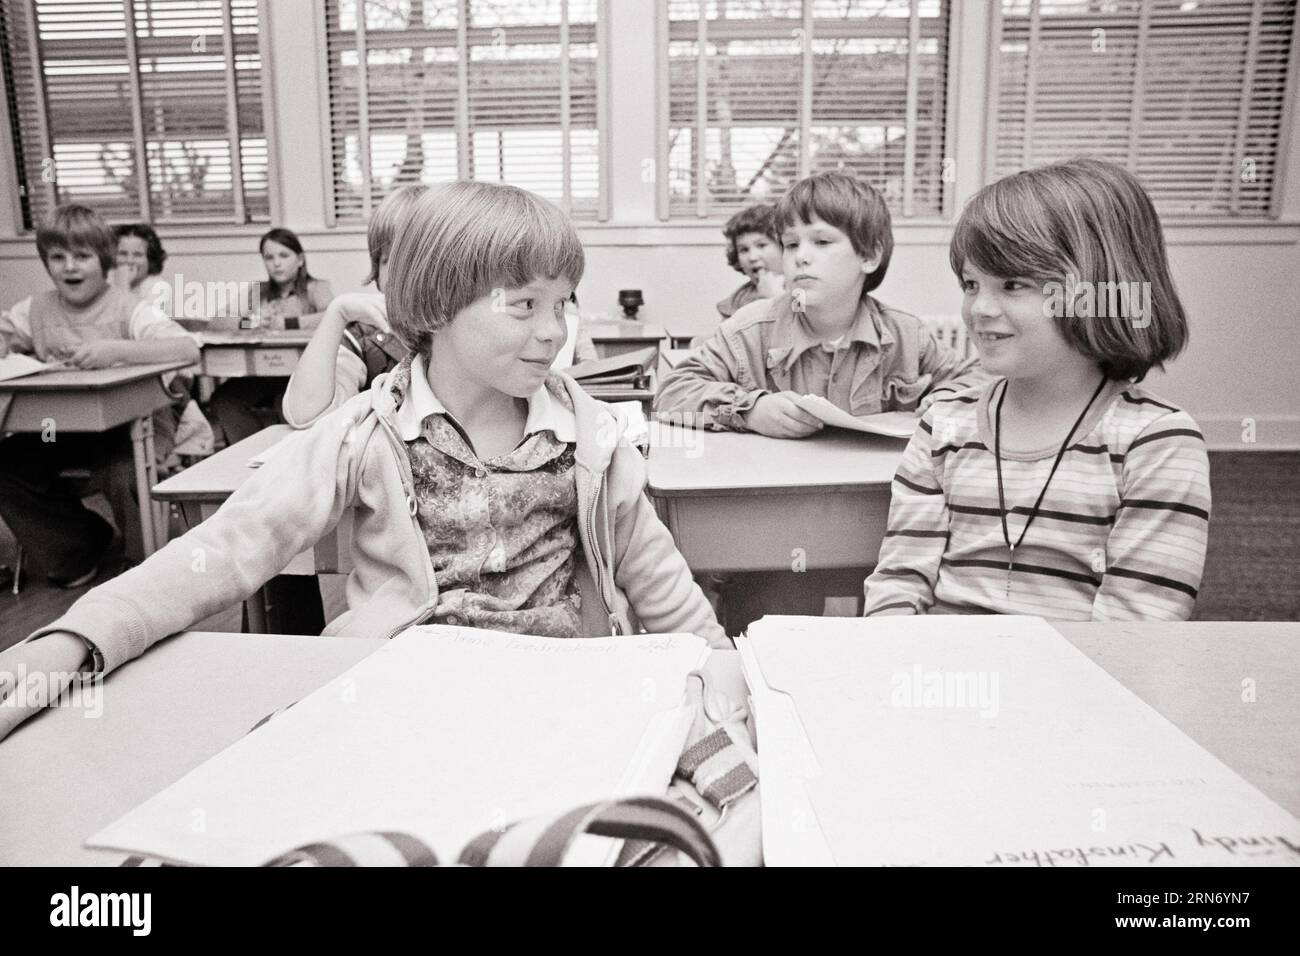 1970s SMILING HAPPY ELEMENTARY SCHOOL CLASSROOM BOYS AND GIRLS STUDENTS TWO STUDENTS SMILING AT ONE ANOTHER - s21226 HAR001 HARS JOY LIFESTYLE FEMALES WINNING COPY SPACE FRIENDSHIP HALF-LENGTH CARING MALES B&W SCHOOLS GRADE HAPPINESS AND OPPORTUNITY PRIMARY CONNECTION FRIENDLY CRUSH PLEASANT AGREEABLE CHARMING COOPERATION GRADE SCHOOL GROWTH JUVENILES LOVABLE PLEASING TOGETHERNESS ADORABLE APPEALING BLACK AND WHITE CAUCASIAN ETHNICITY CLASSMATES HAR001 OLD FASHIONED Stock Photo